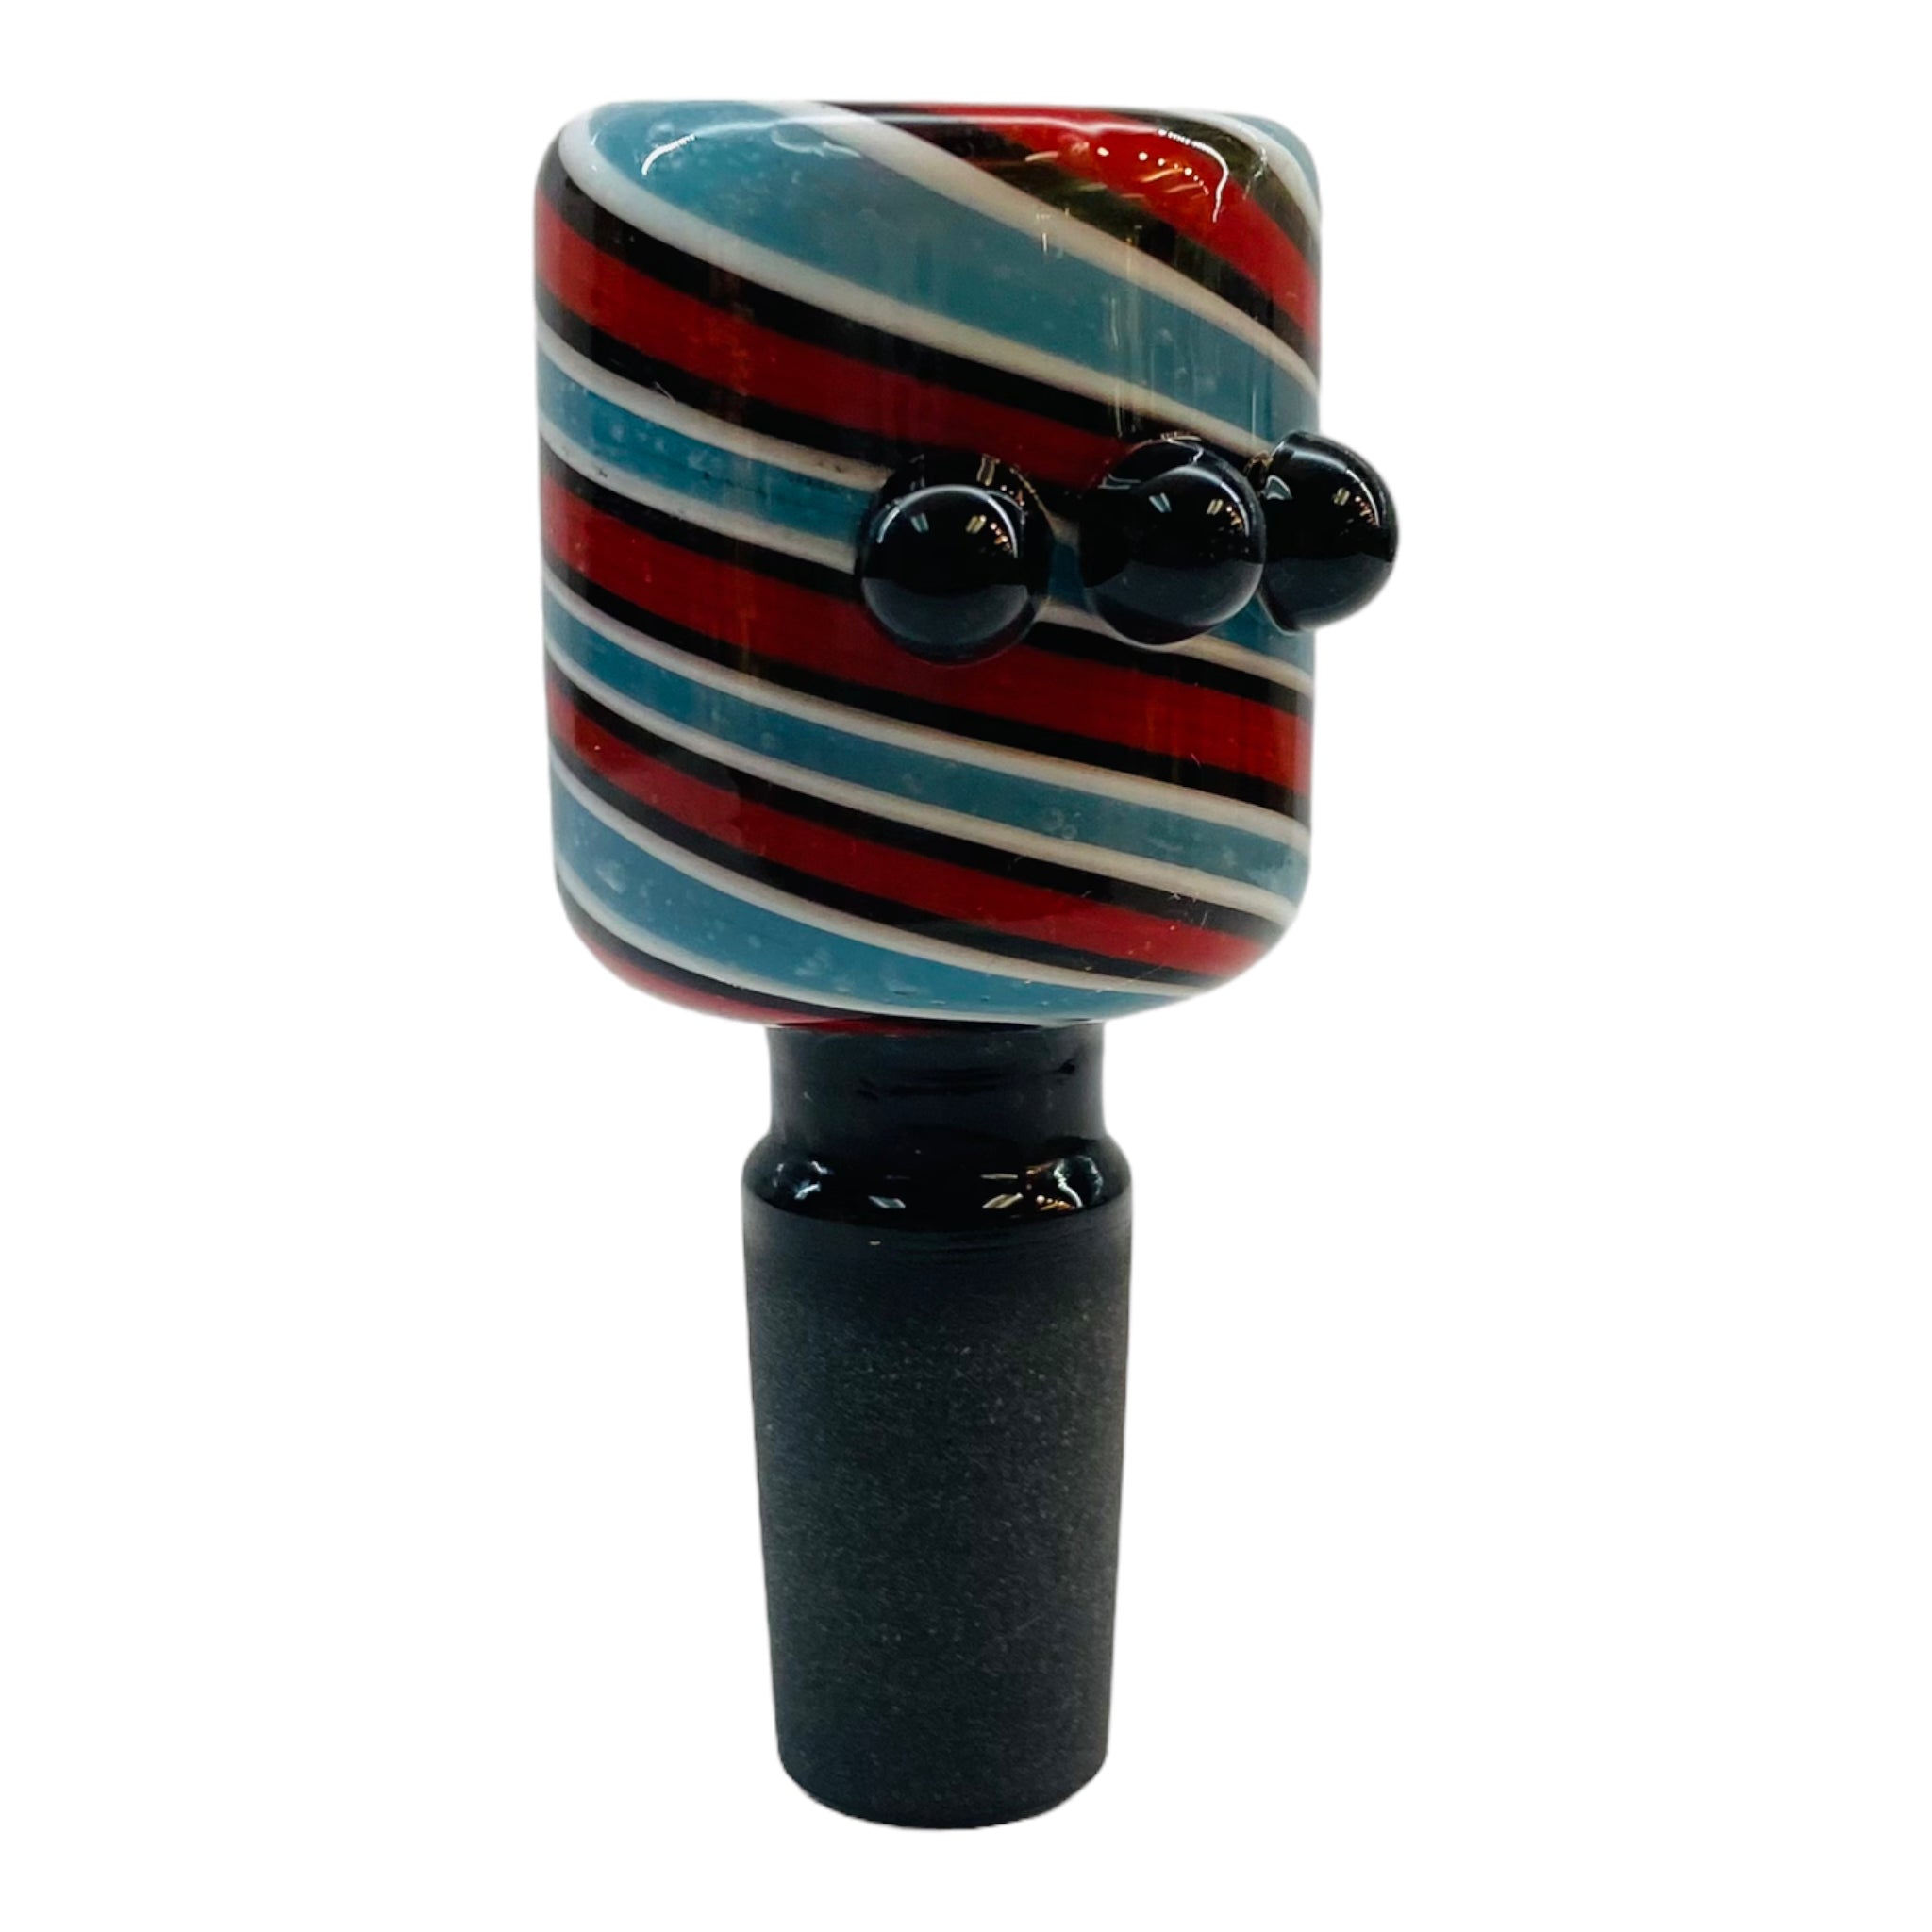 14mm Flower Bowl - Black Fitting With Tall Color Twist Bubble - Red, White, Blue, And Black